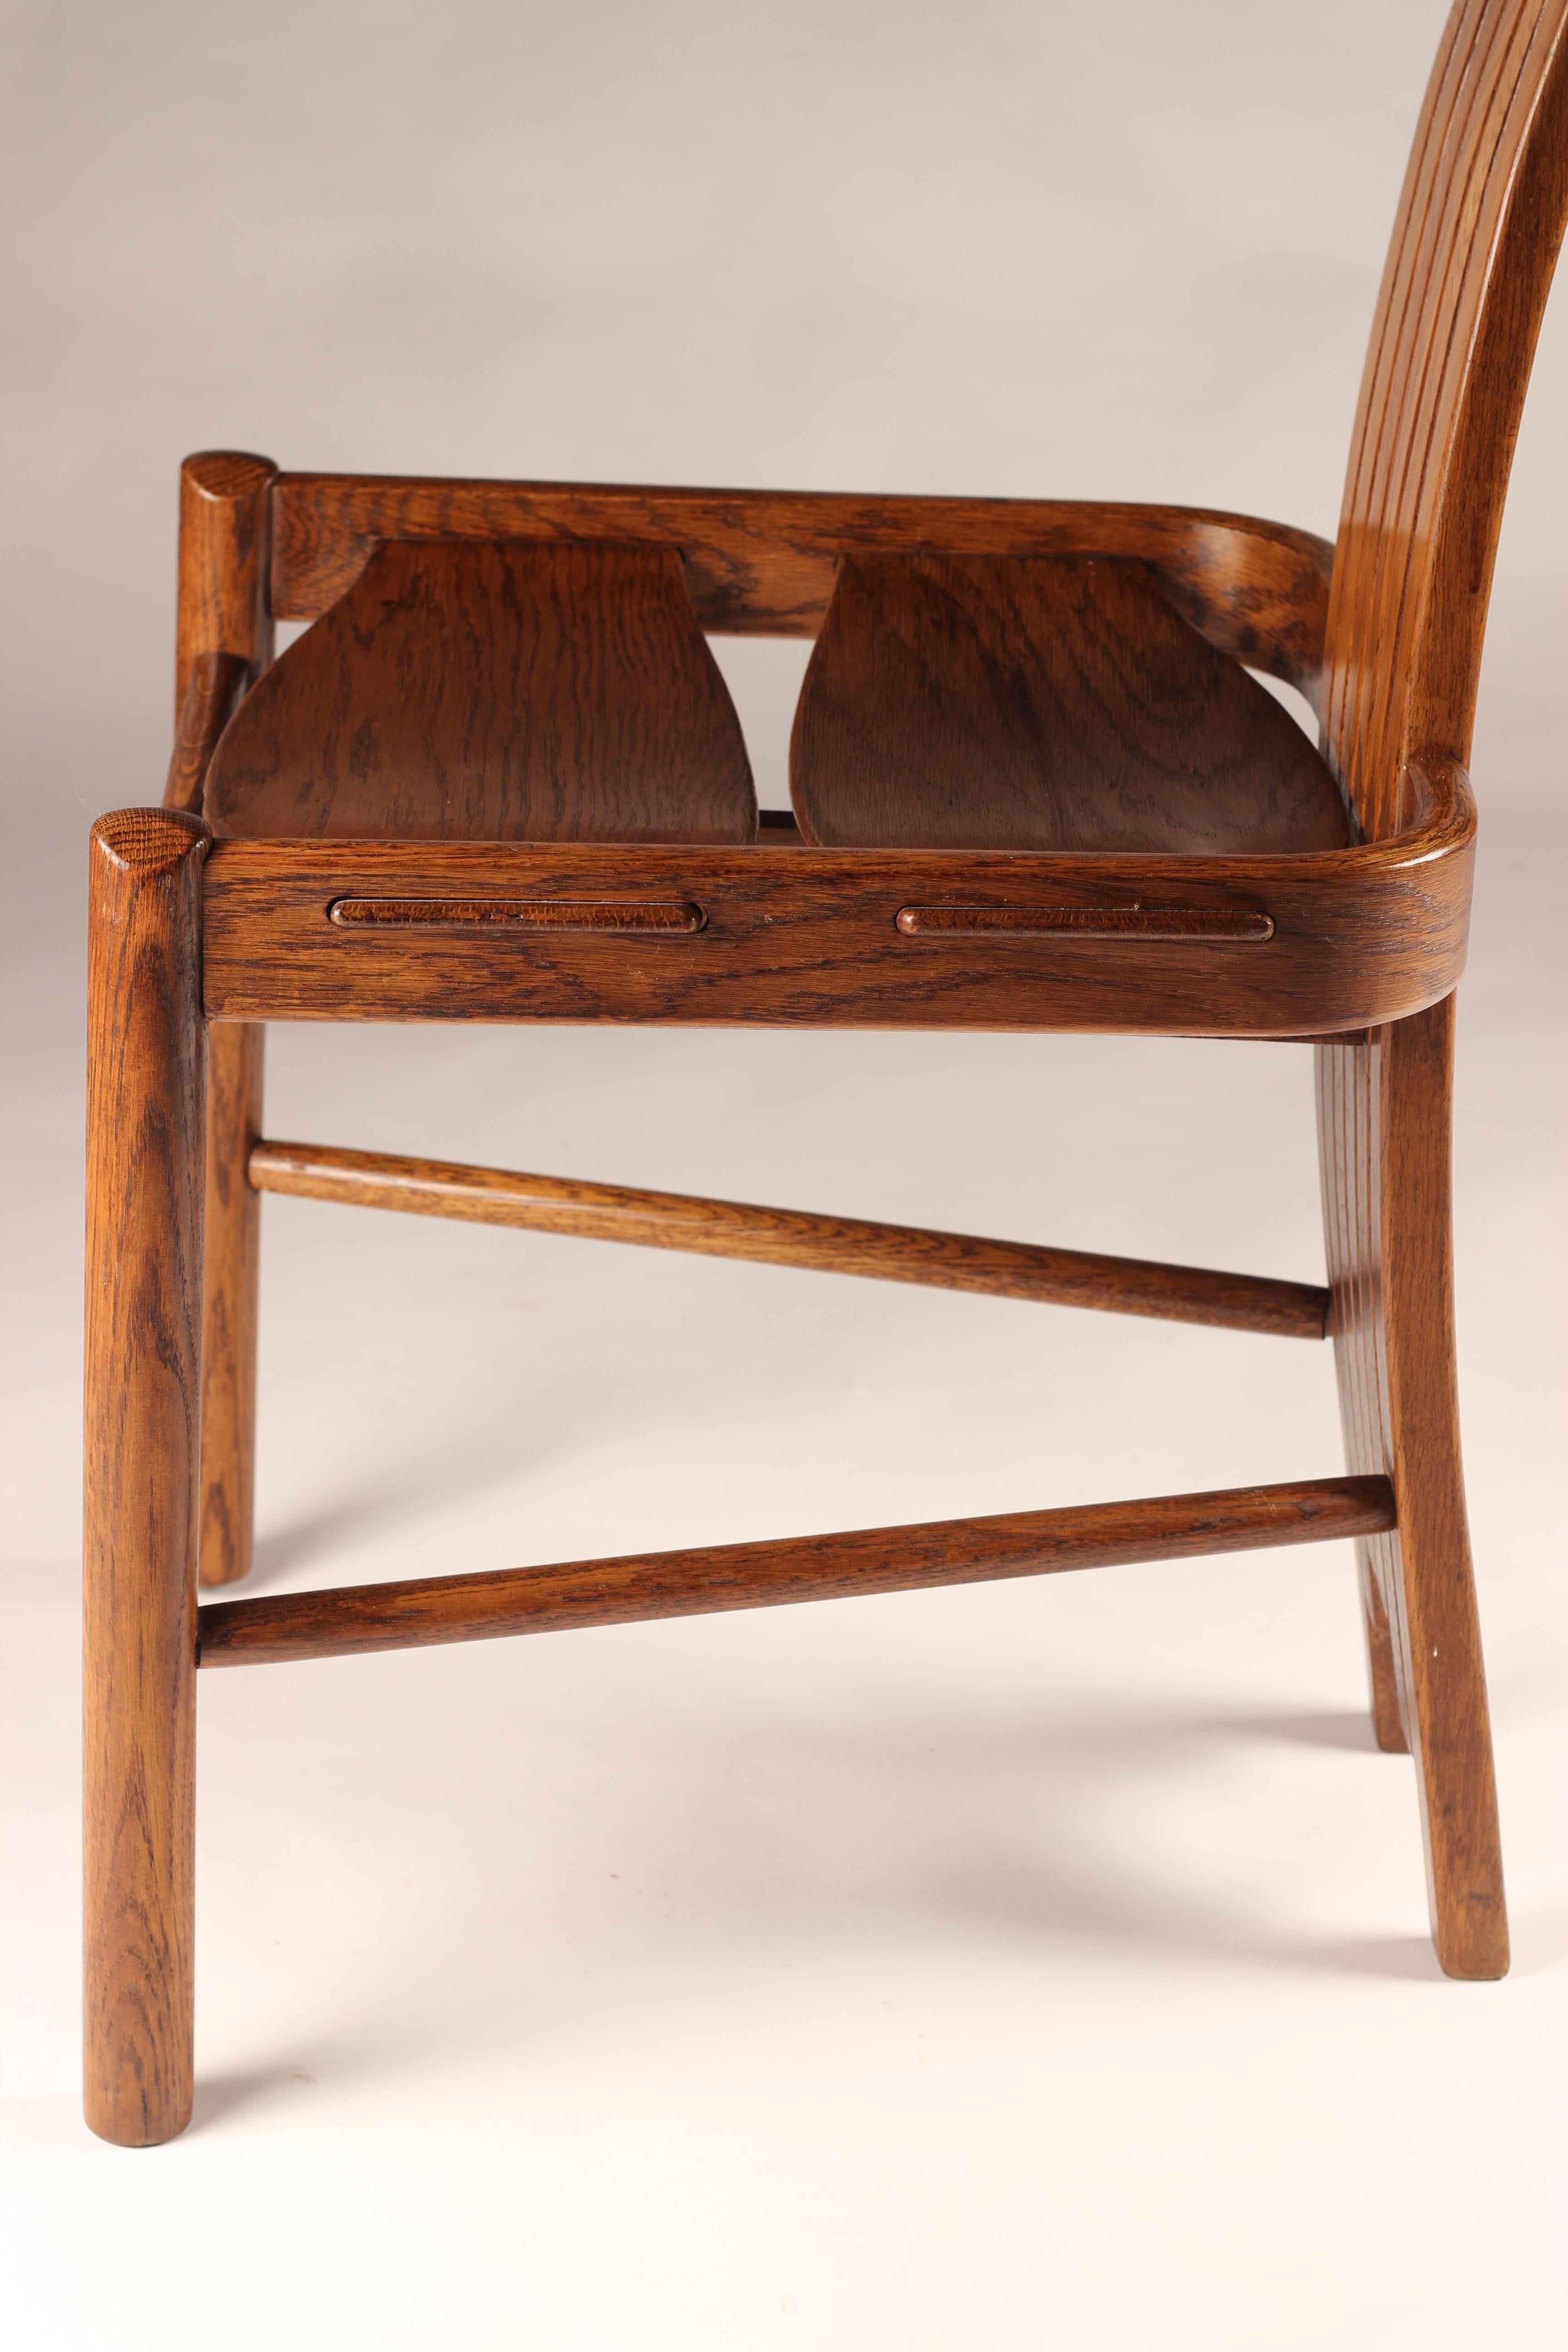 Oak Steam Bent Dining Chairs in the Arts and Crafts/ Art Nouveau Style, 1900’s For Sale 8